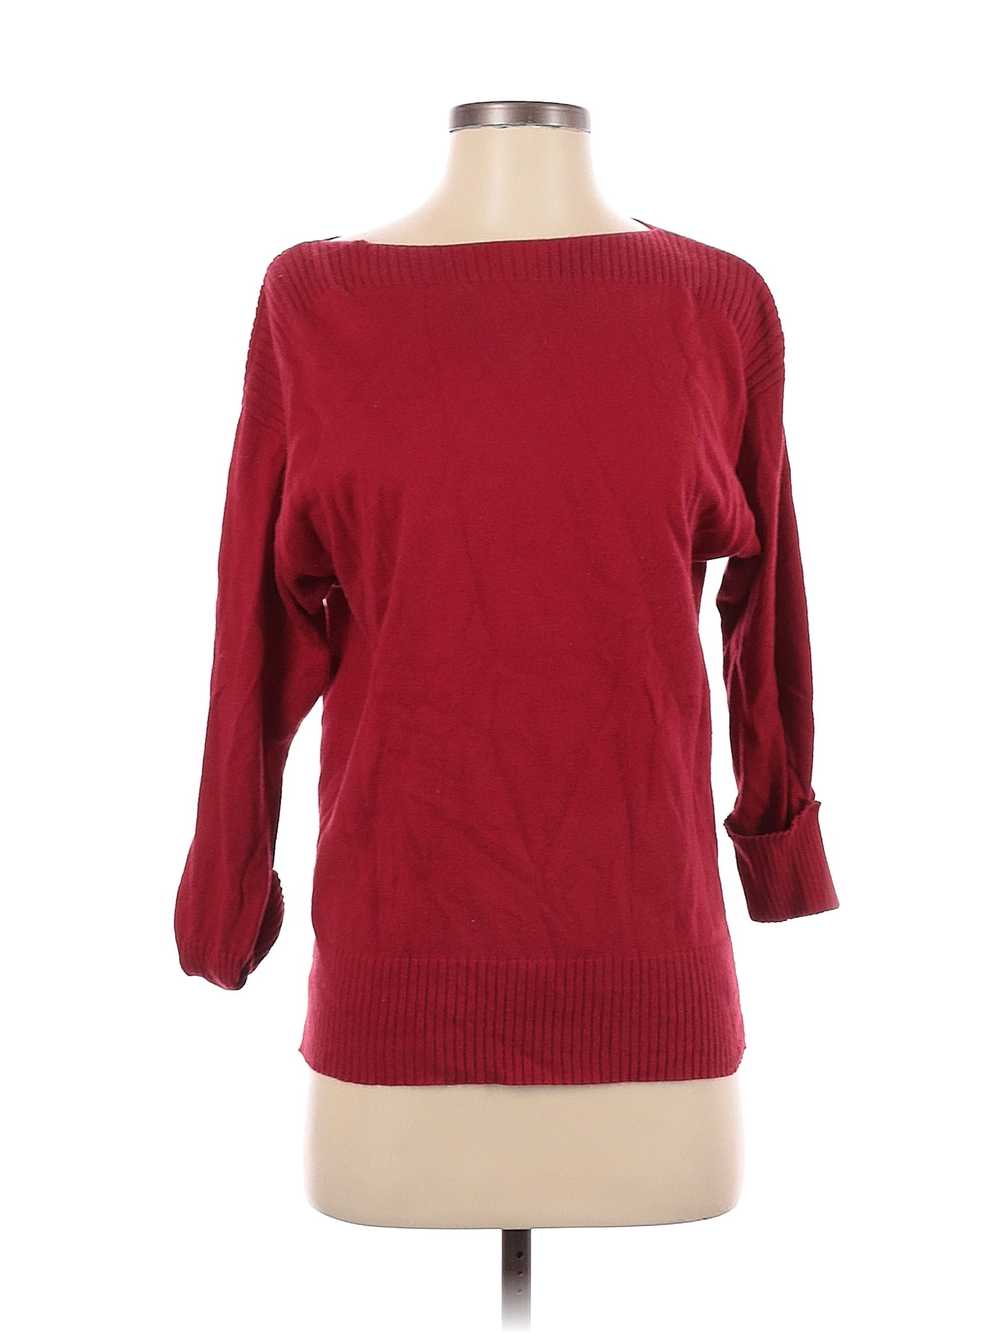 Chico's Women Red Pullover Sweater S - image 1